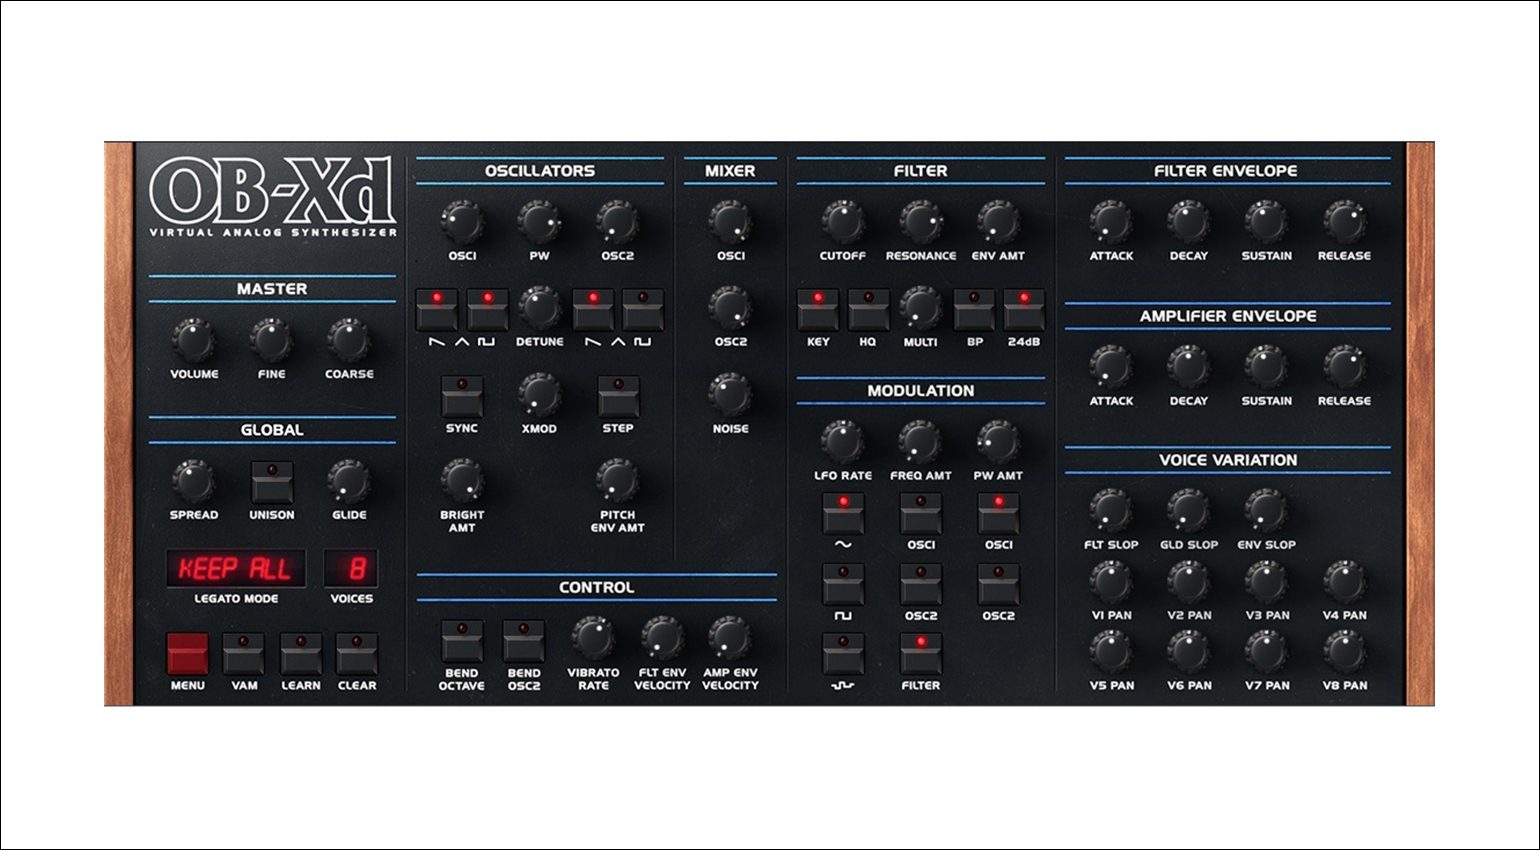 OB-Xd free software synth